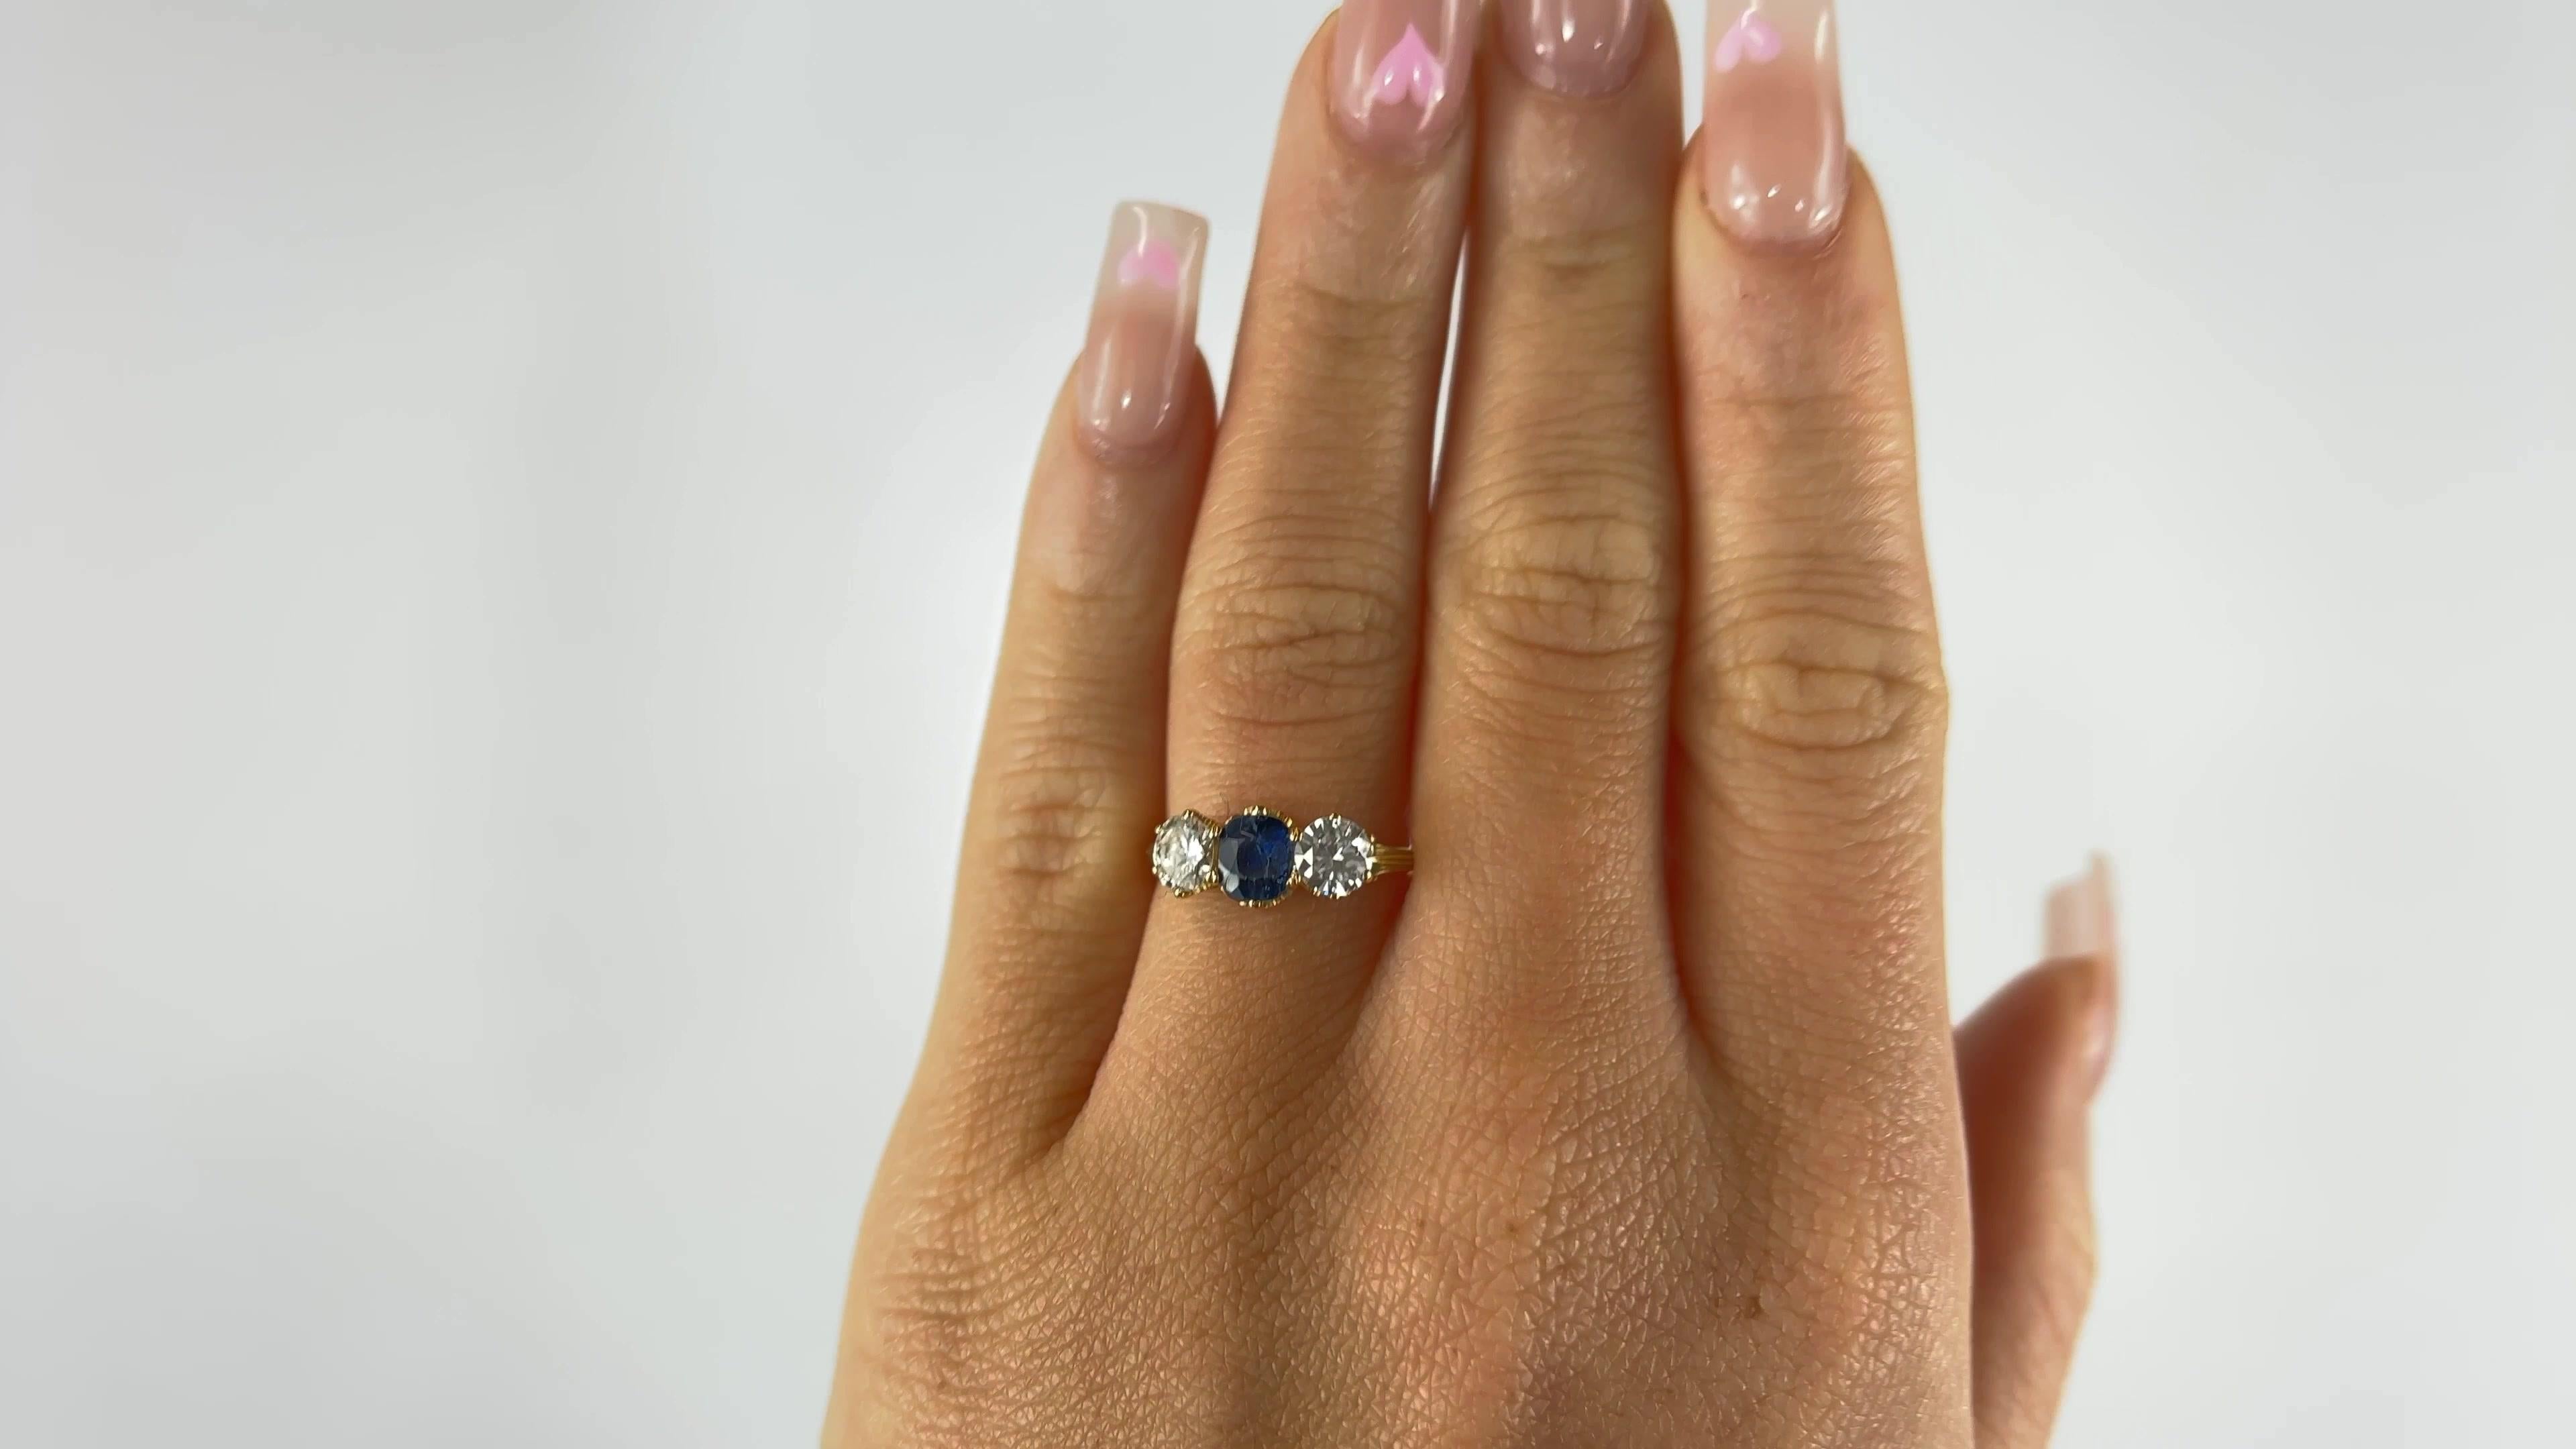 One Antique English GIA Sapphire Diamond 18 Karat Gold Three Stone Ring. Featuring GIA certified one oval shaped sapphire of approximately 1.30 carats accompanied with certificate #6224278350 stating the sapphire is of Australian origin and has not